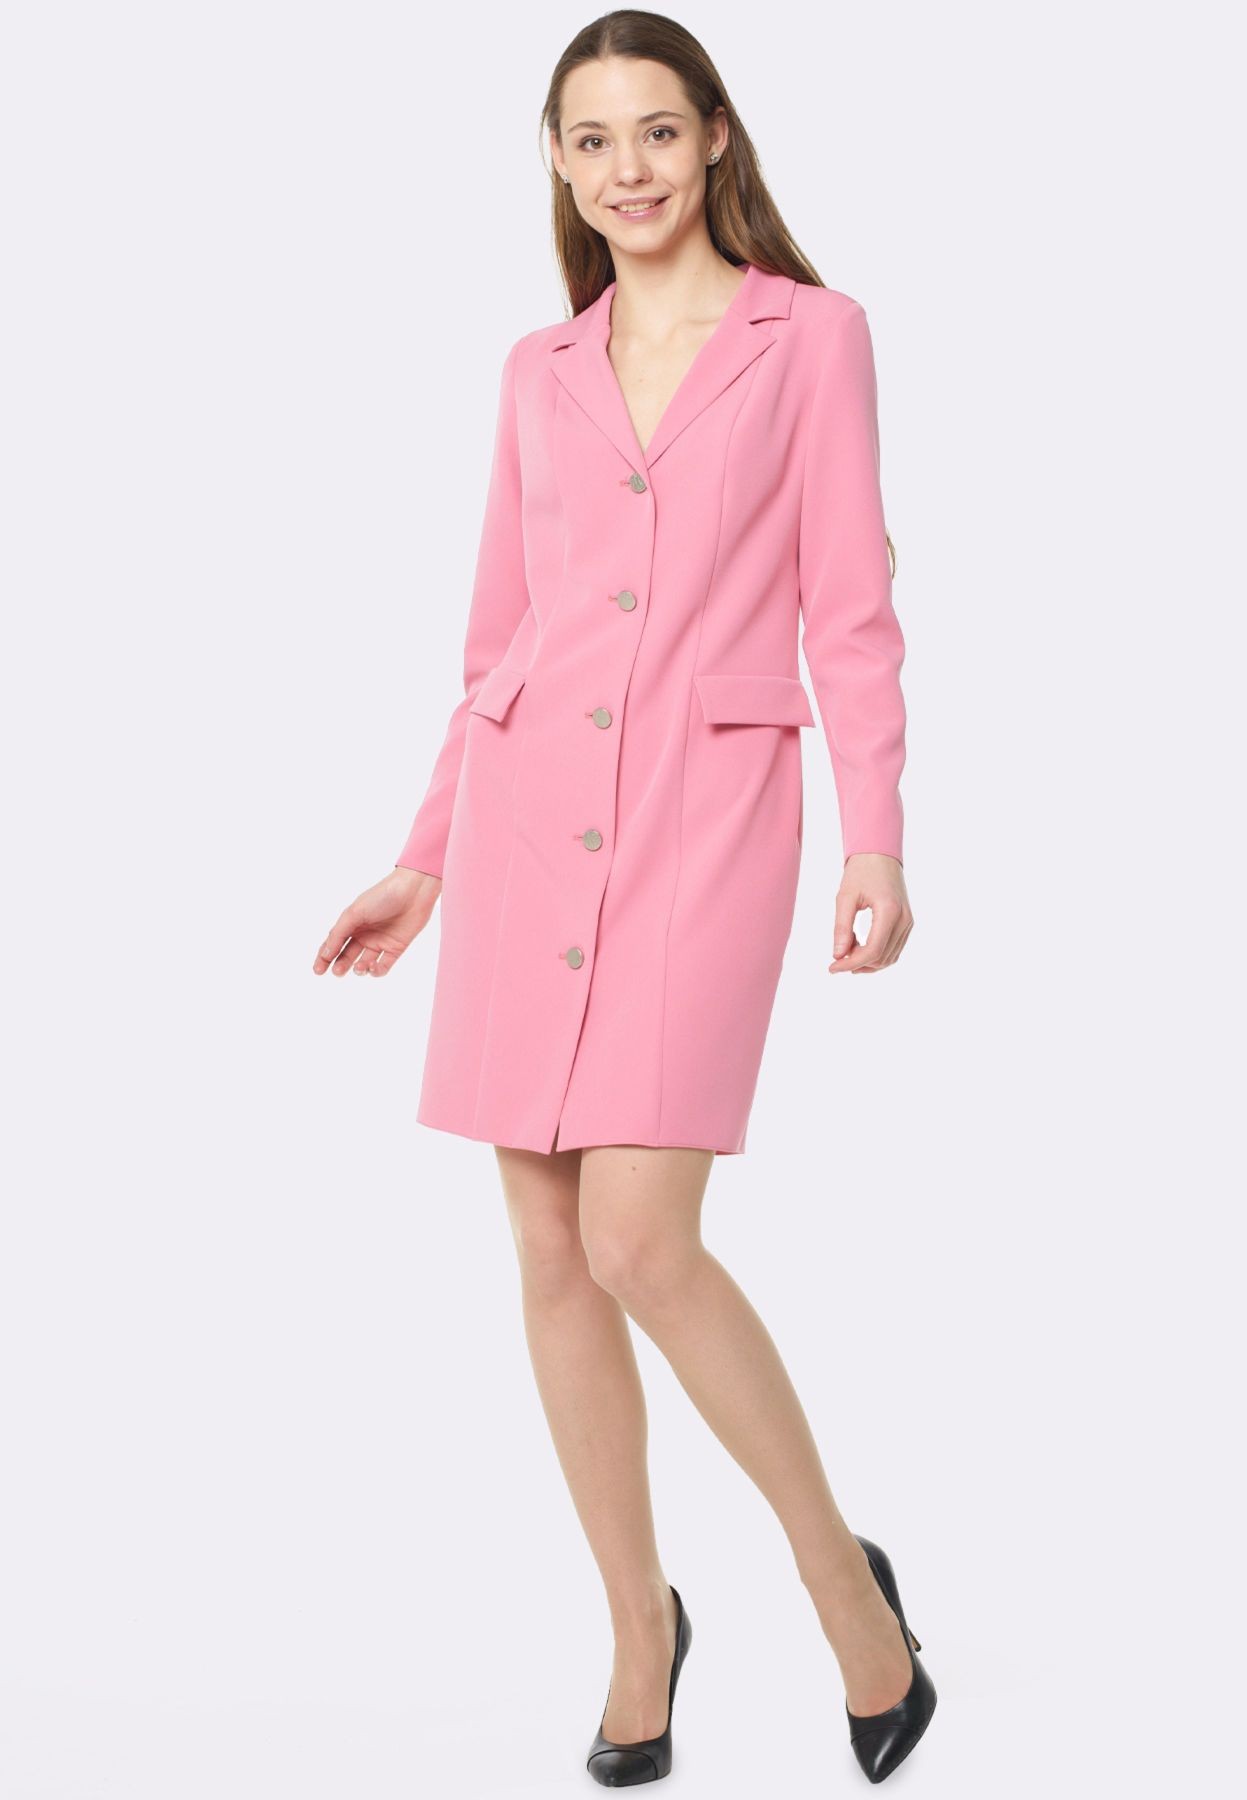 Dress-jacket of bright pink color 5636p